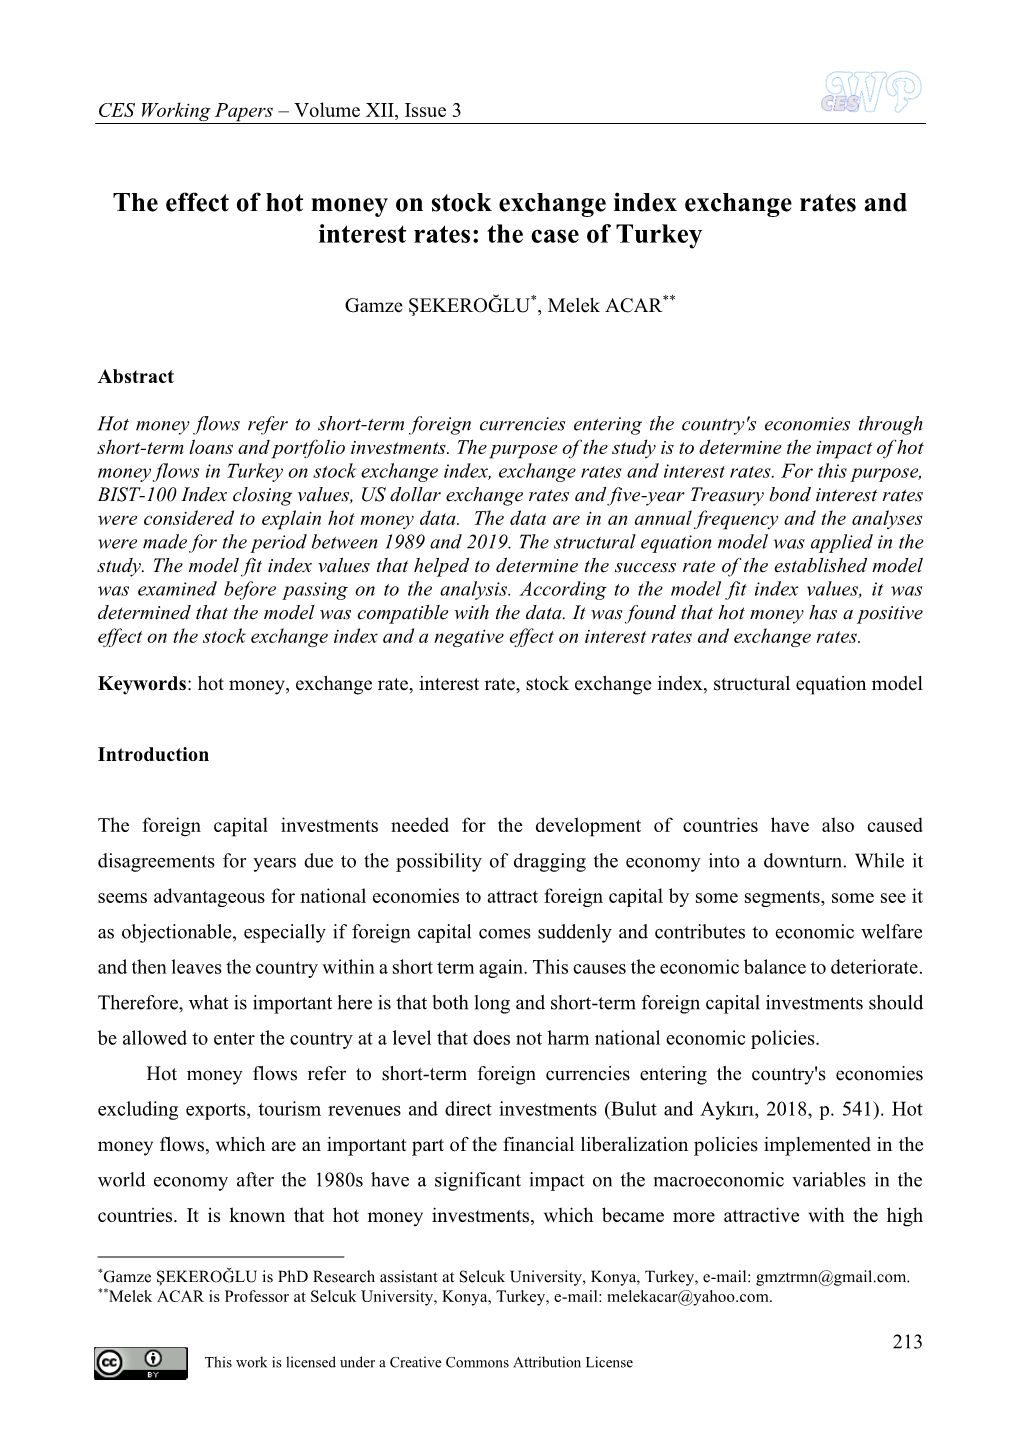 The Effect of Hot Money on Stock Exchange Index Exchange Rates and Interest Rates: the Case of Turkey